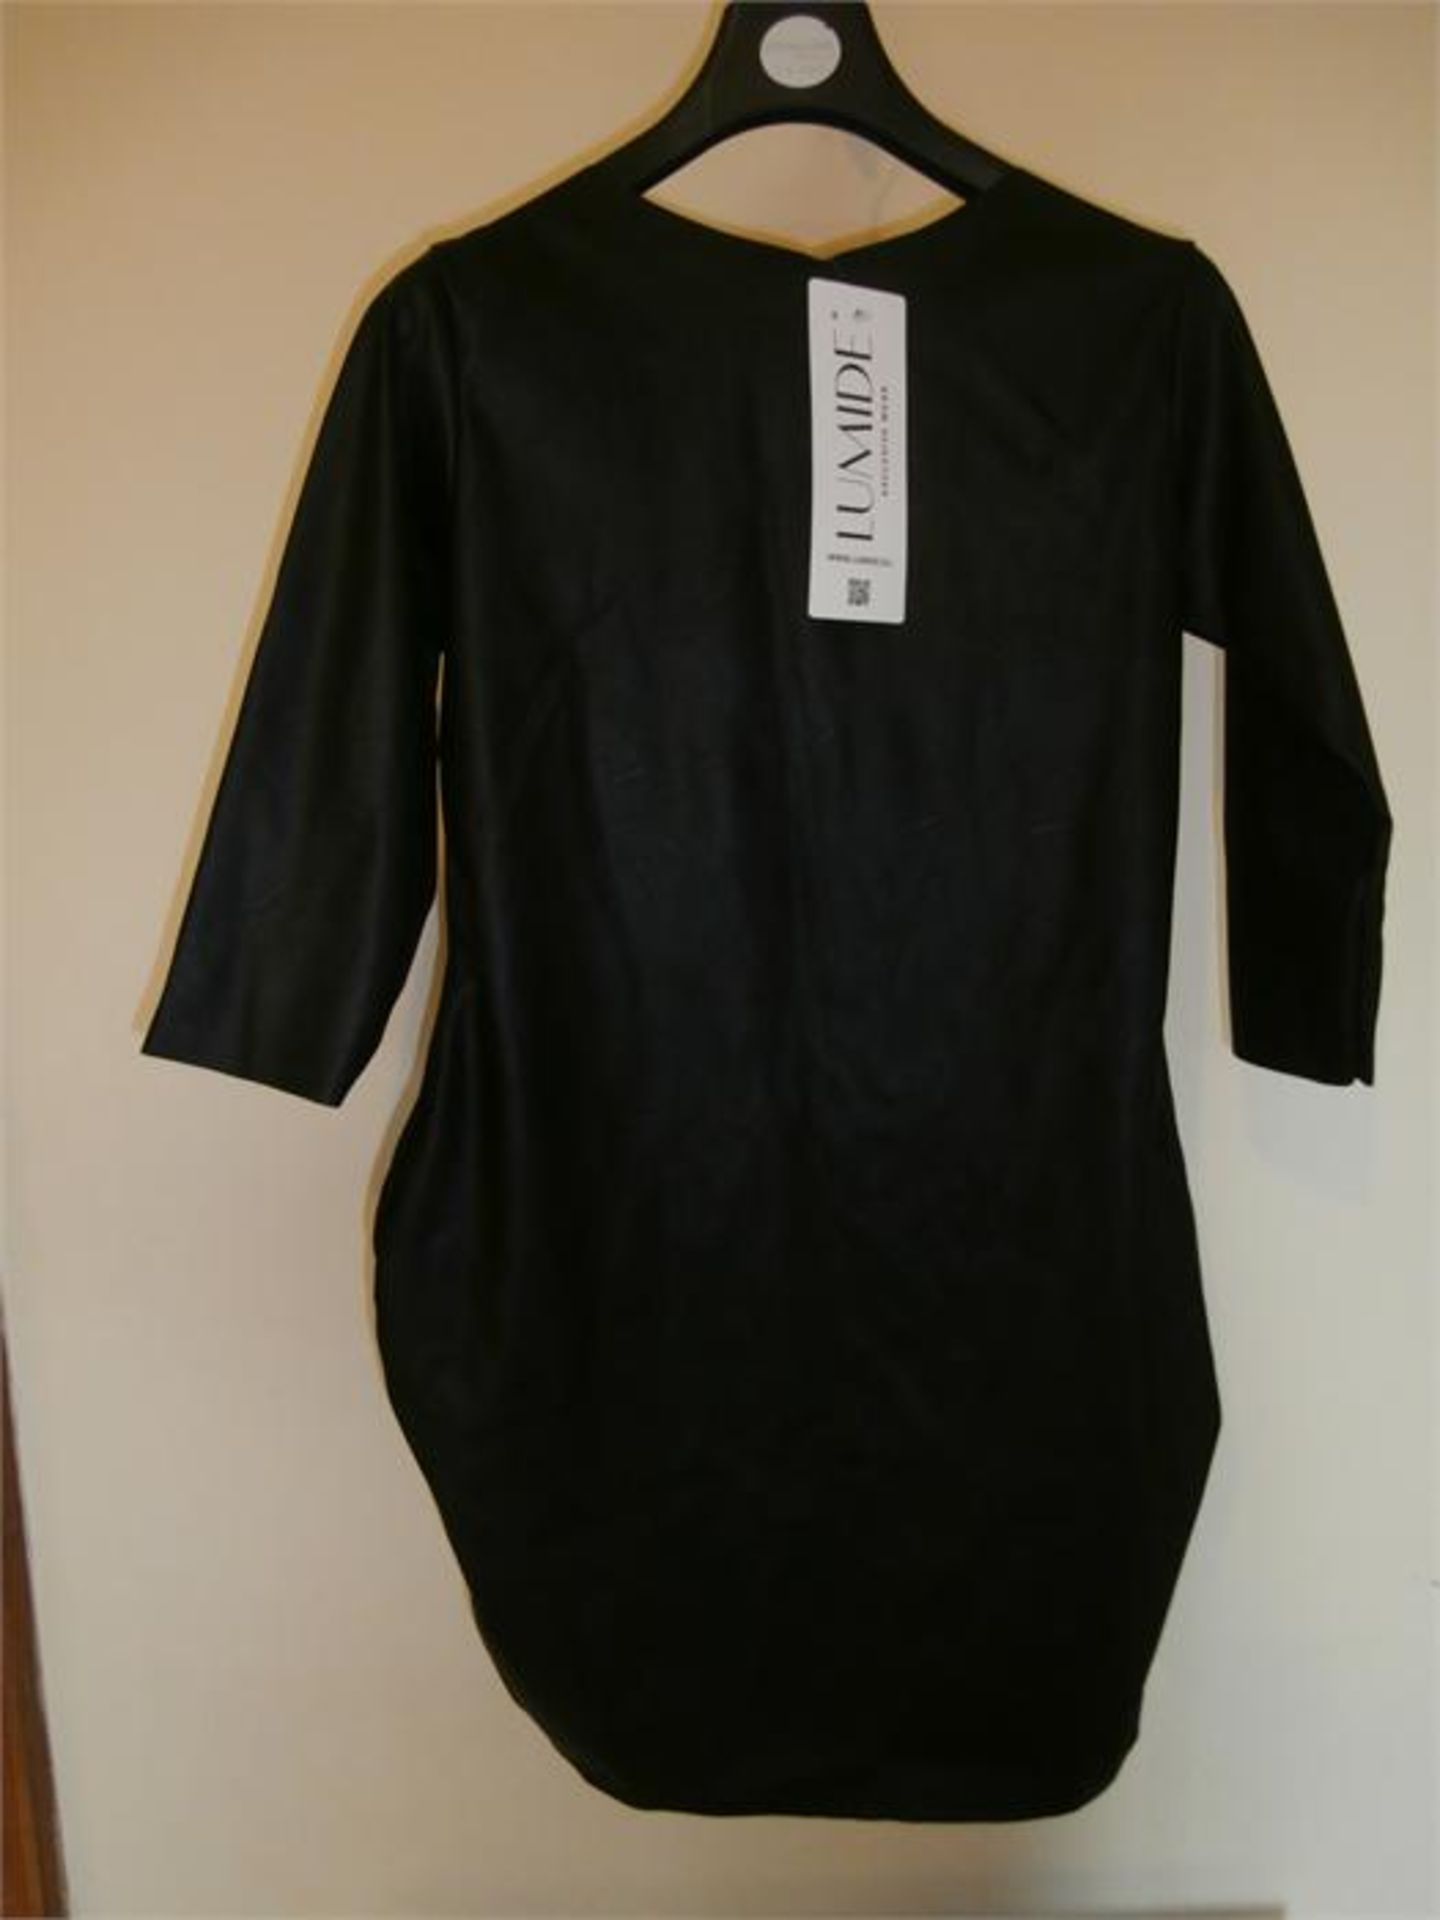 NEW. Lumide, Ladies, Black, Faux Leather Sleeves and Front of DRESS. Size S/M. RRP £9